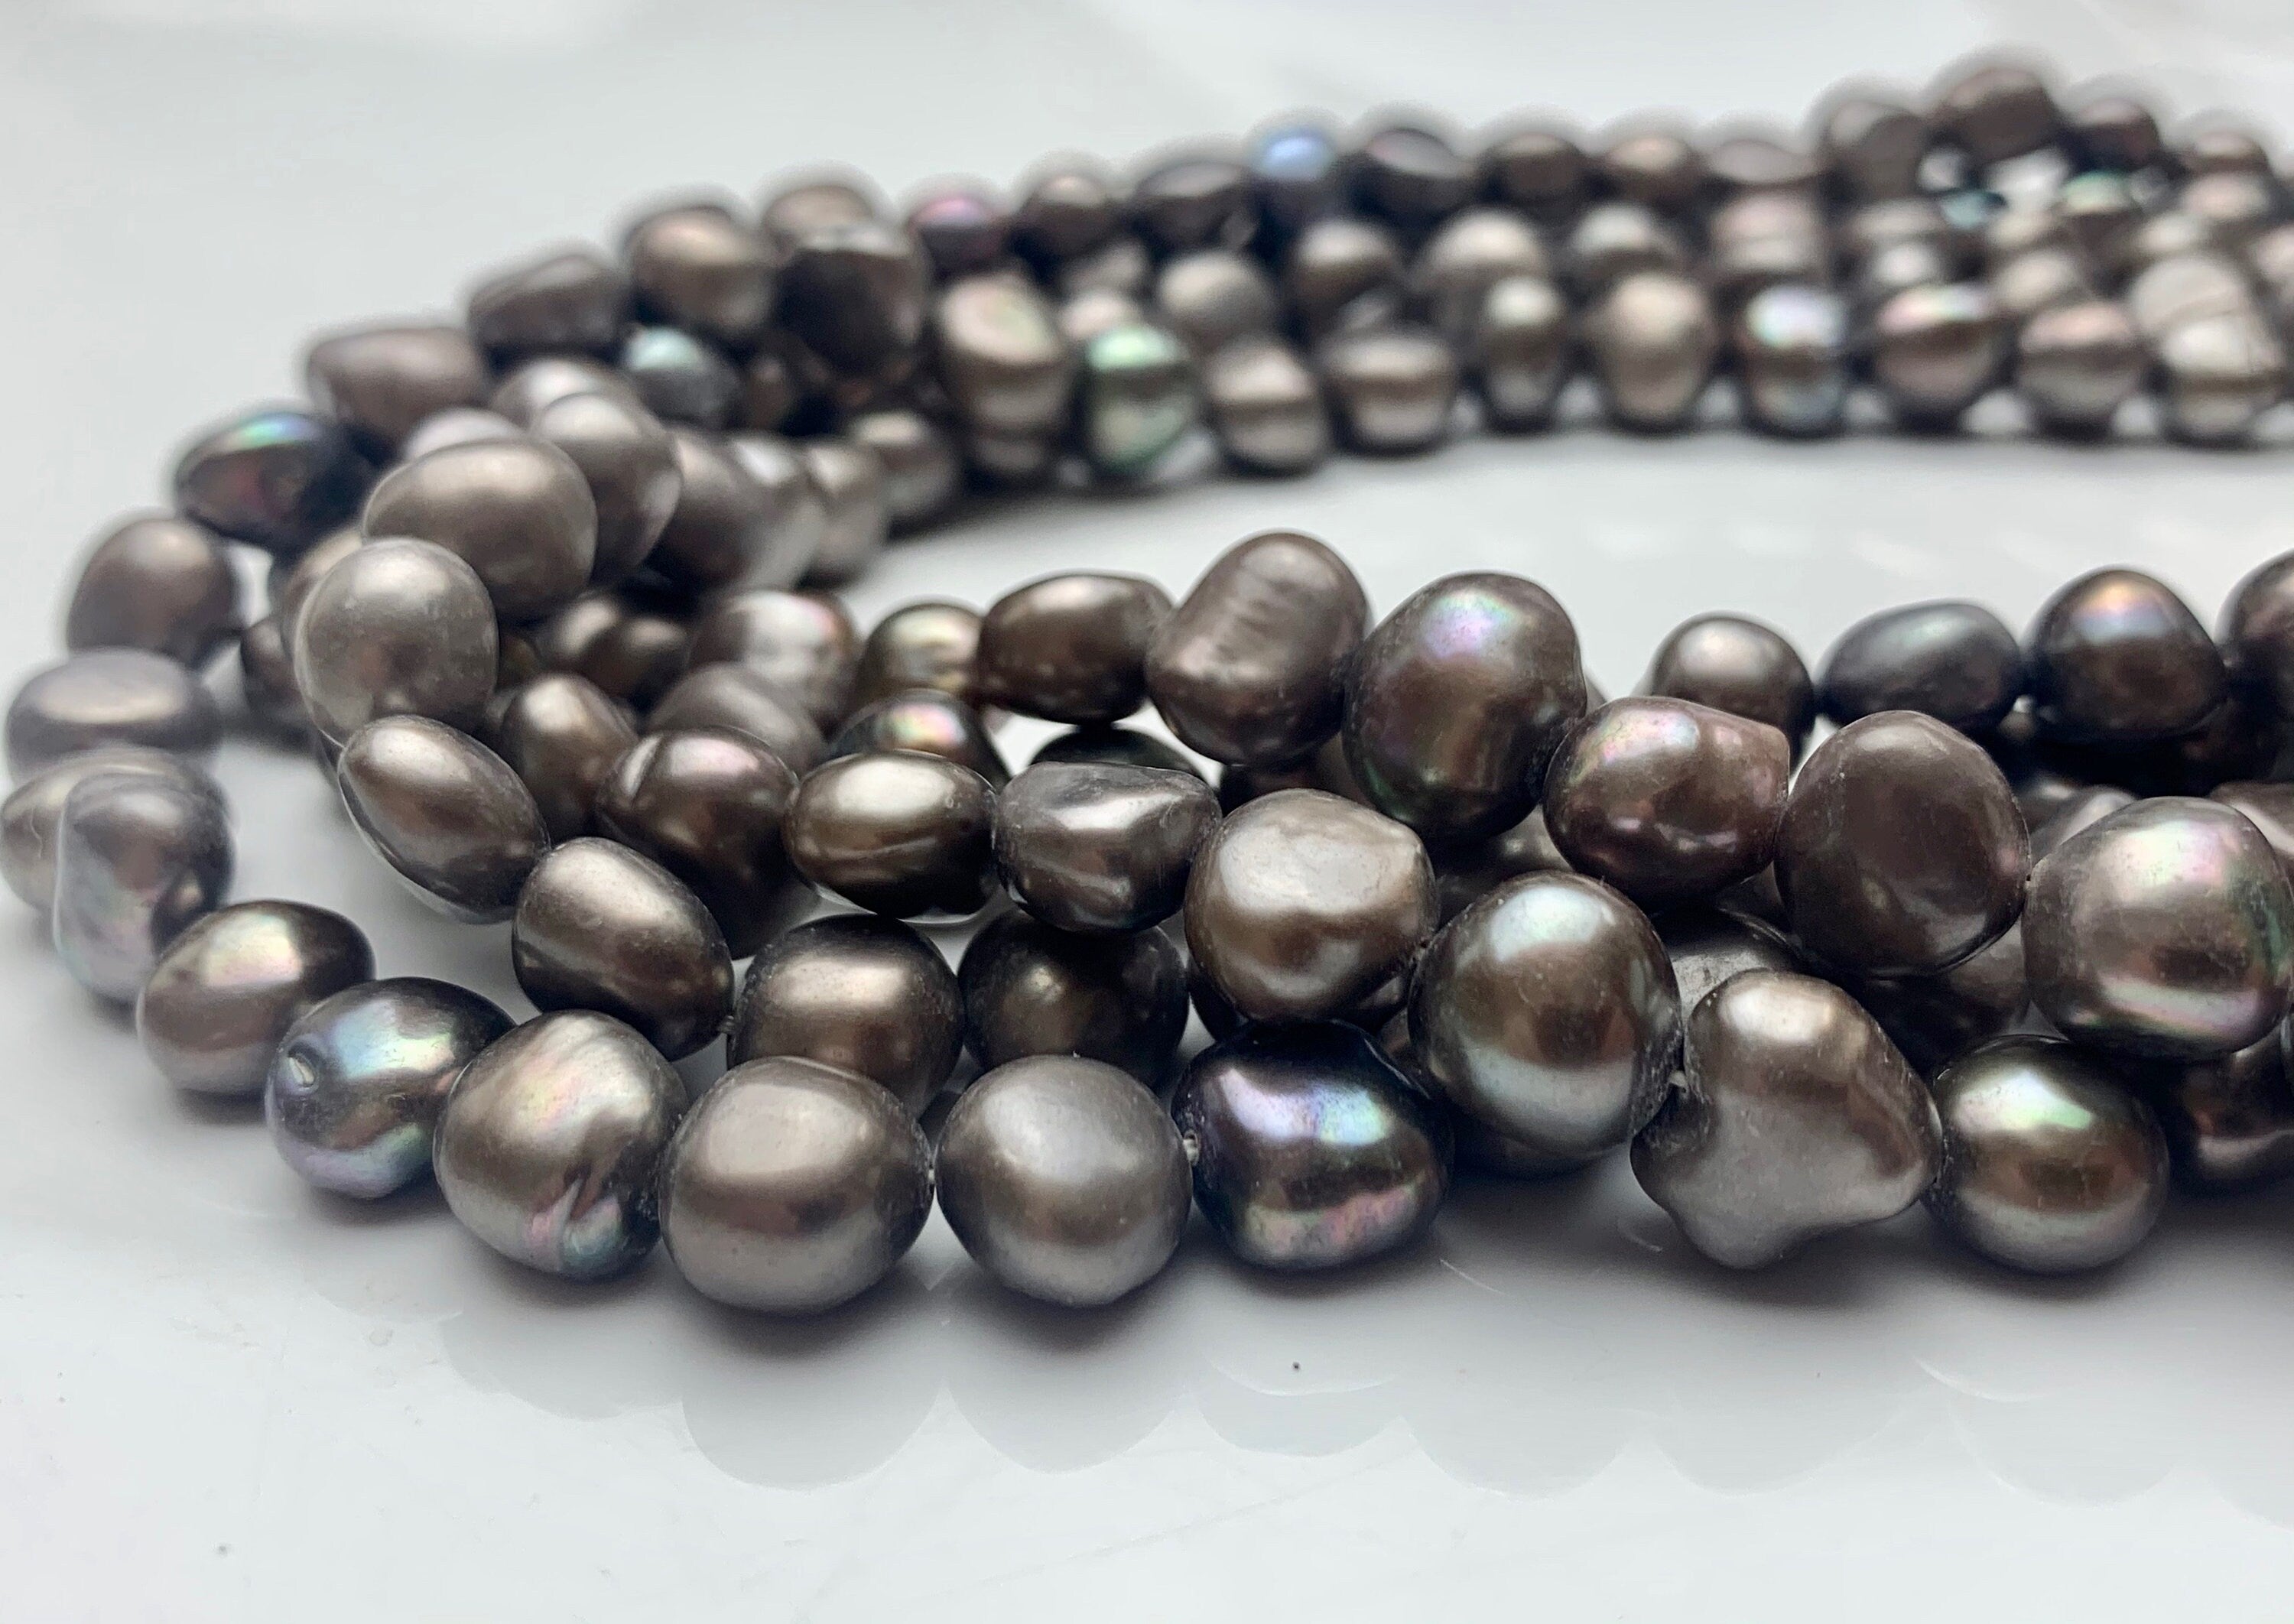 8-9 mm AAA Gray Color Freshwater Pearl Potato Nugget Beads Genuine